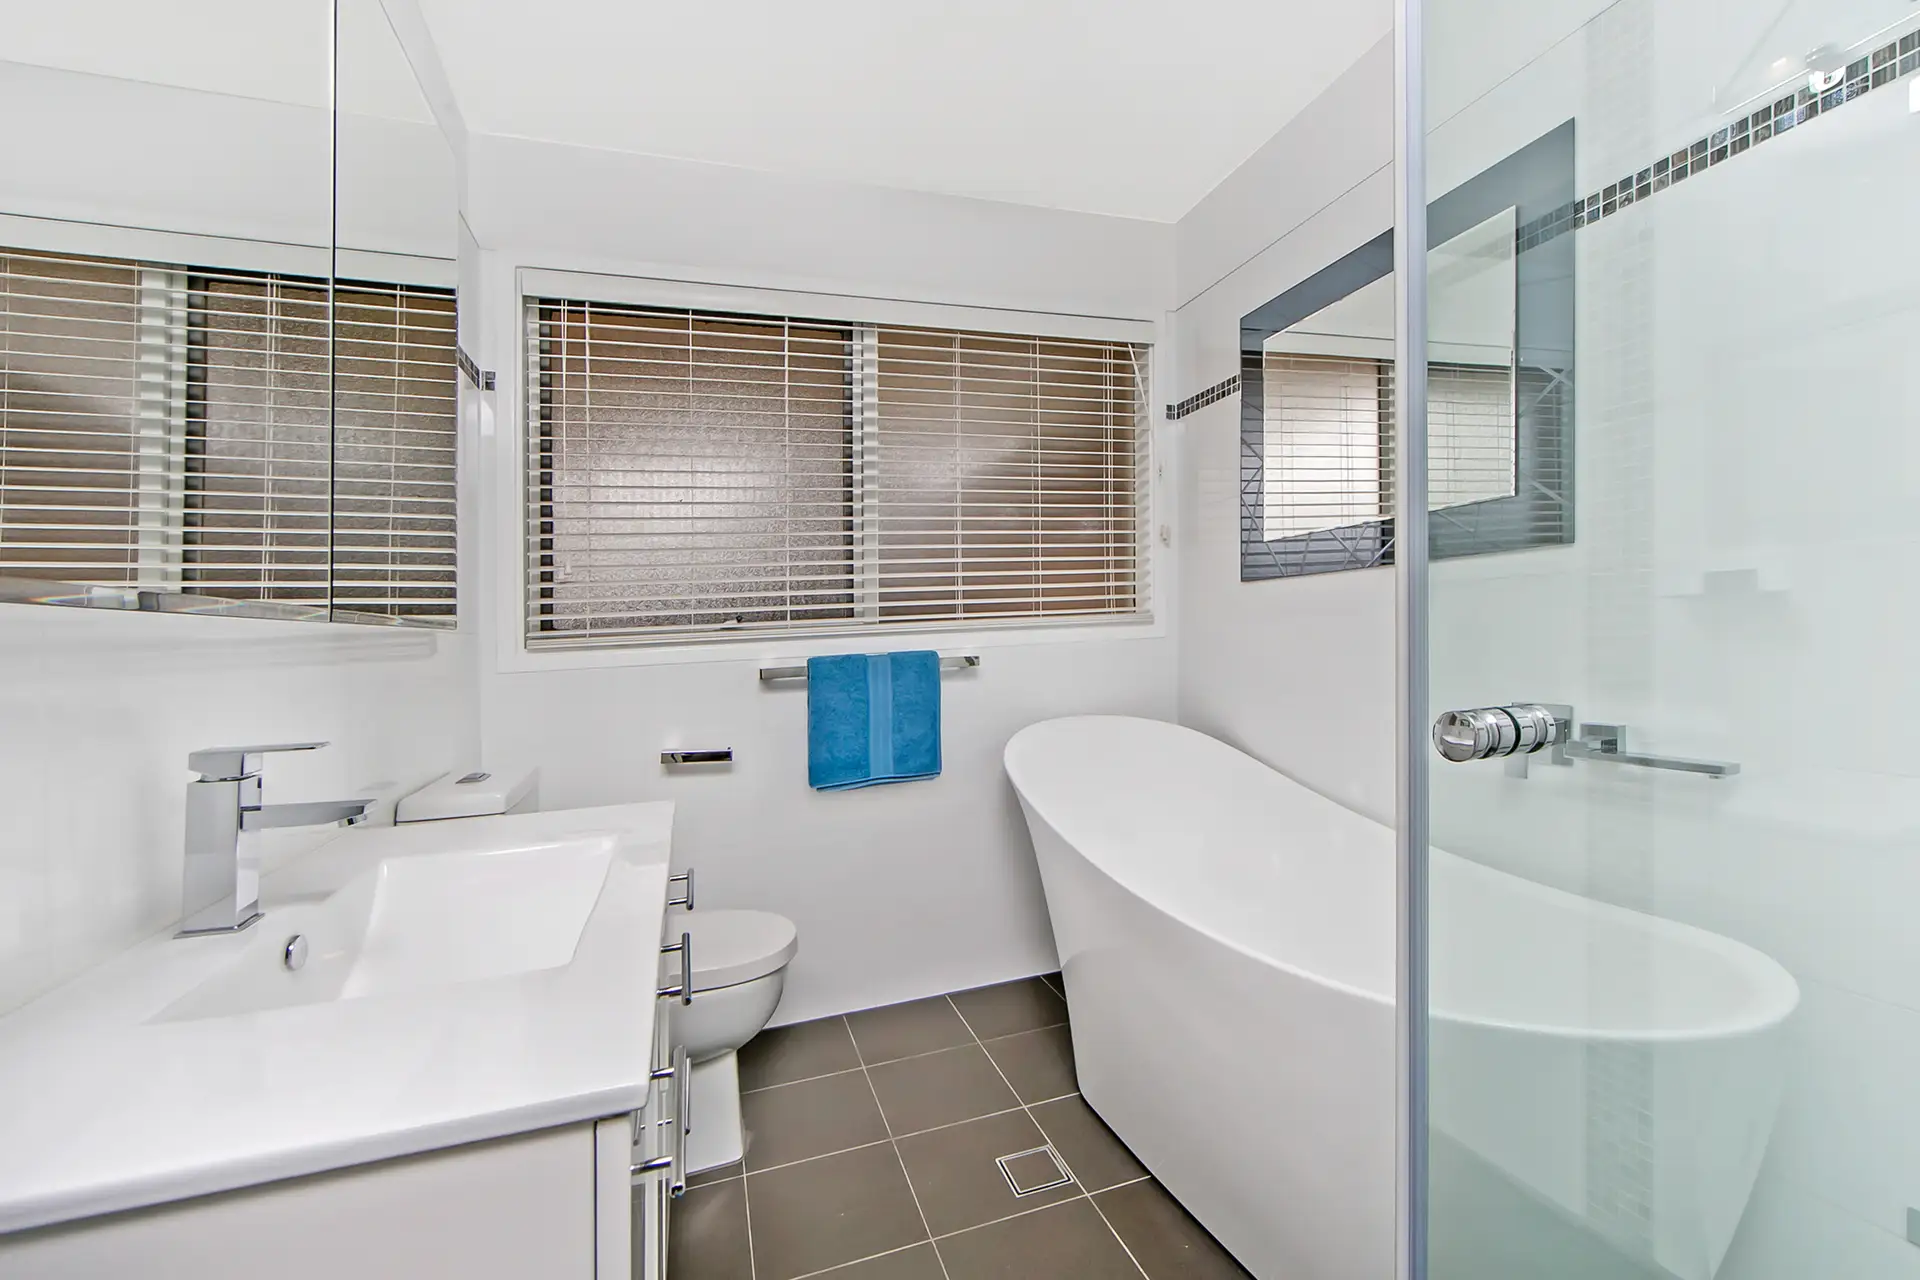 Photo #10: 4 Camellia Court, Cherrybrook - Sold by Louis Carr Real Estate